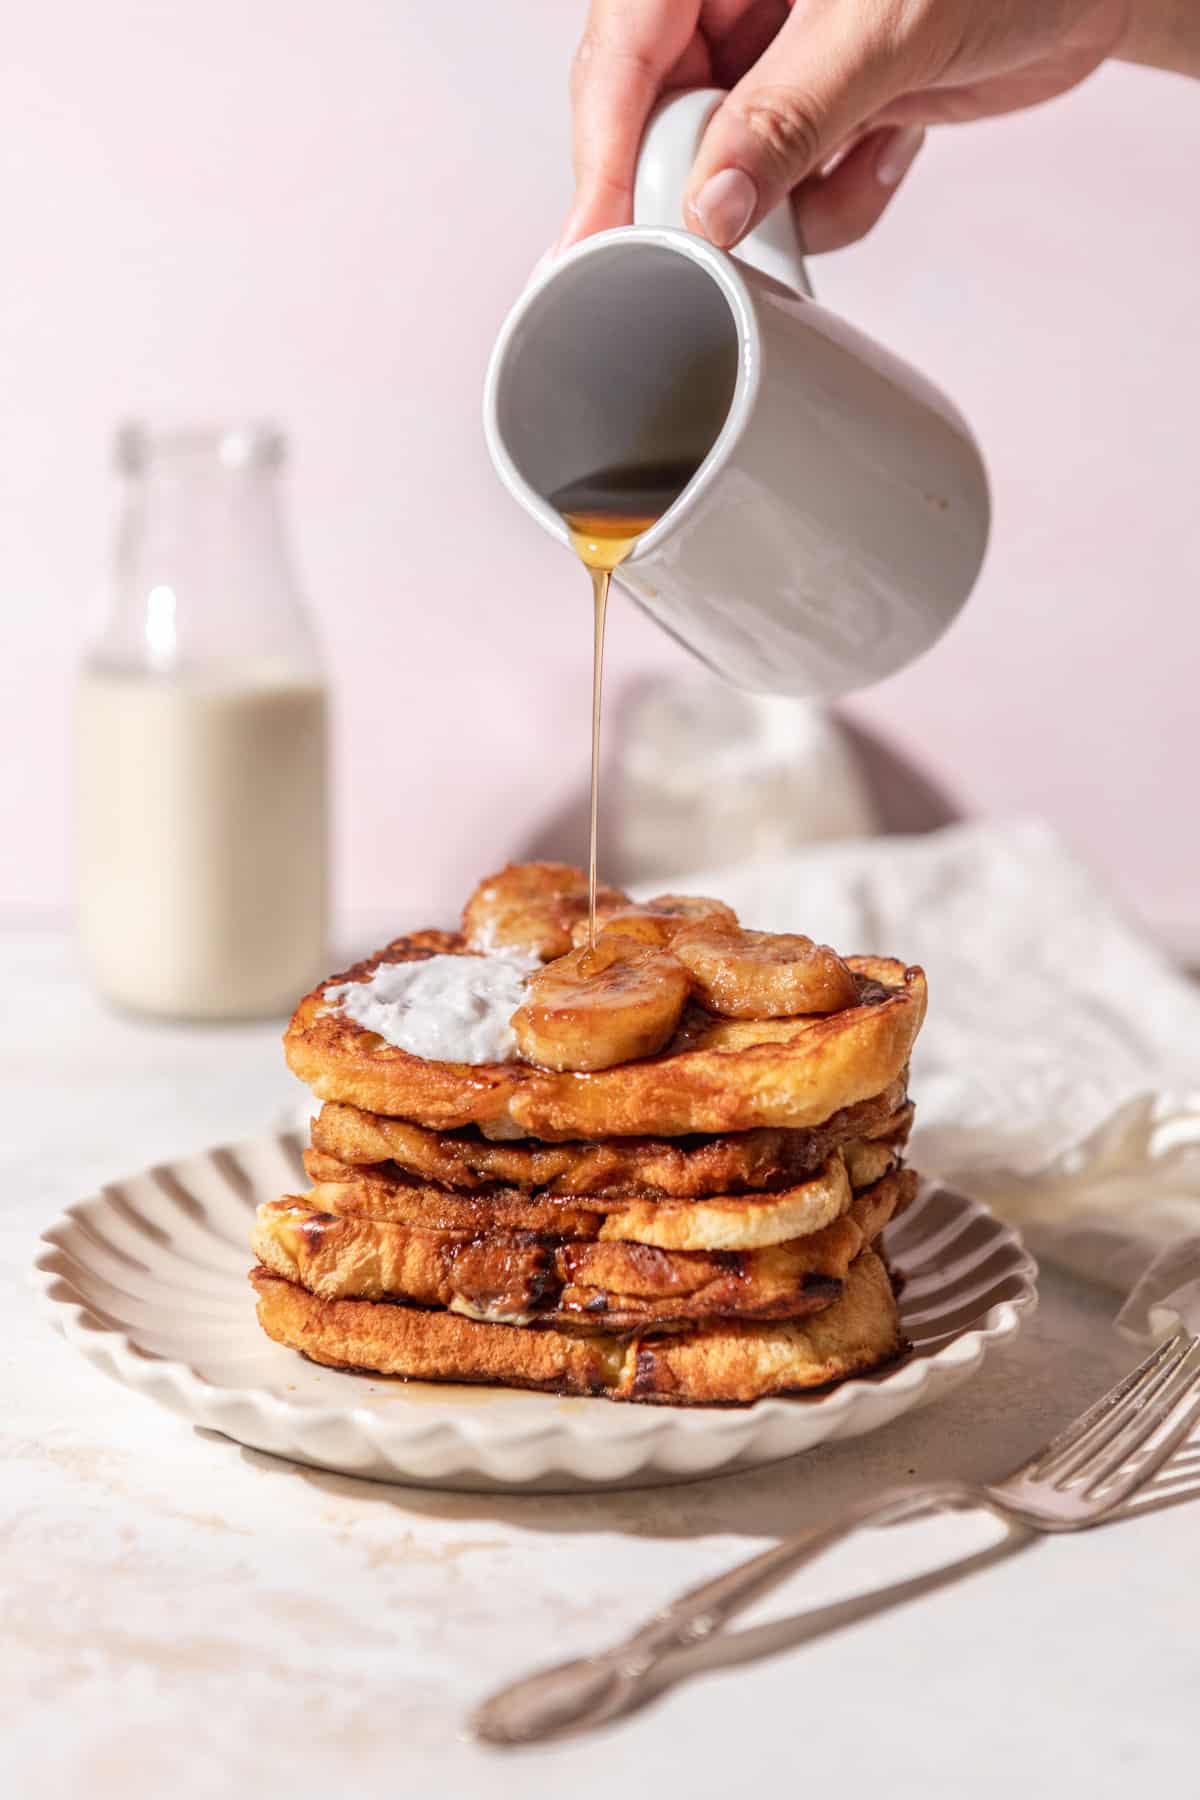 Maple syrup being poured over a stack of French toast on a plate.